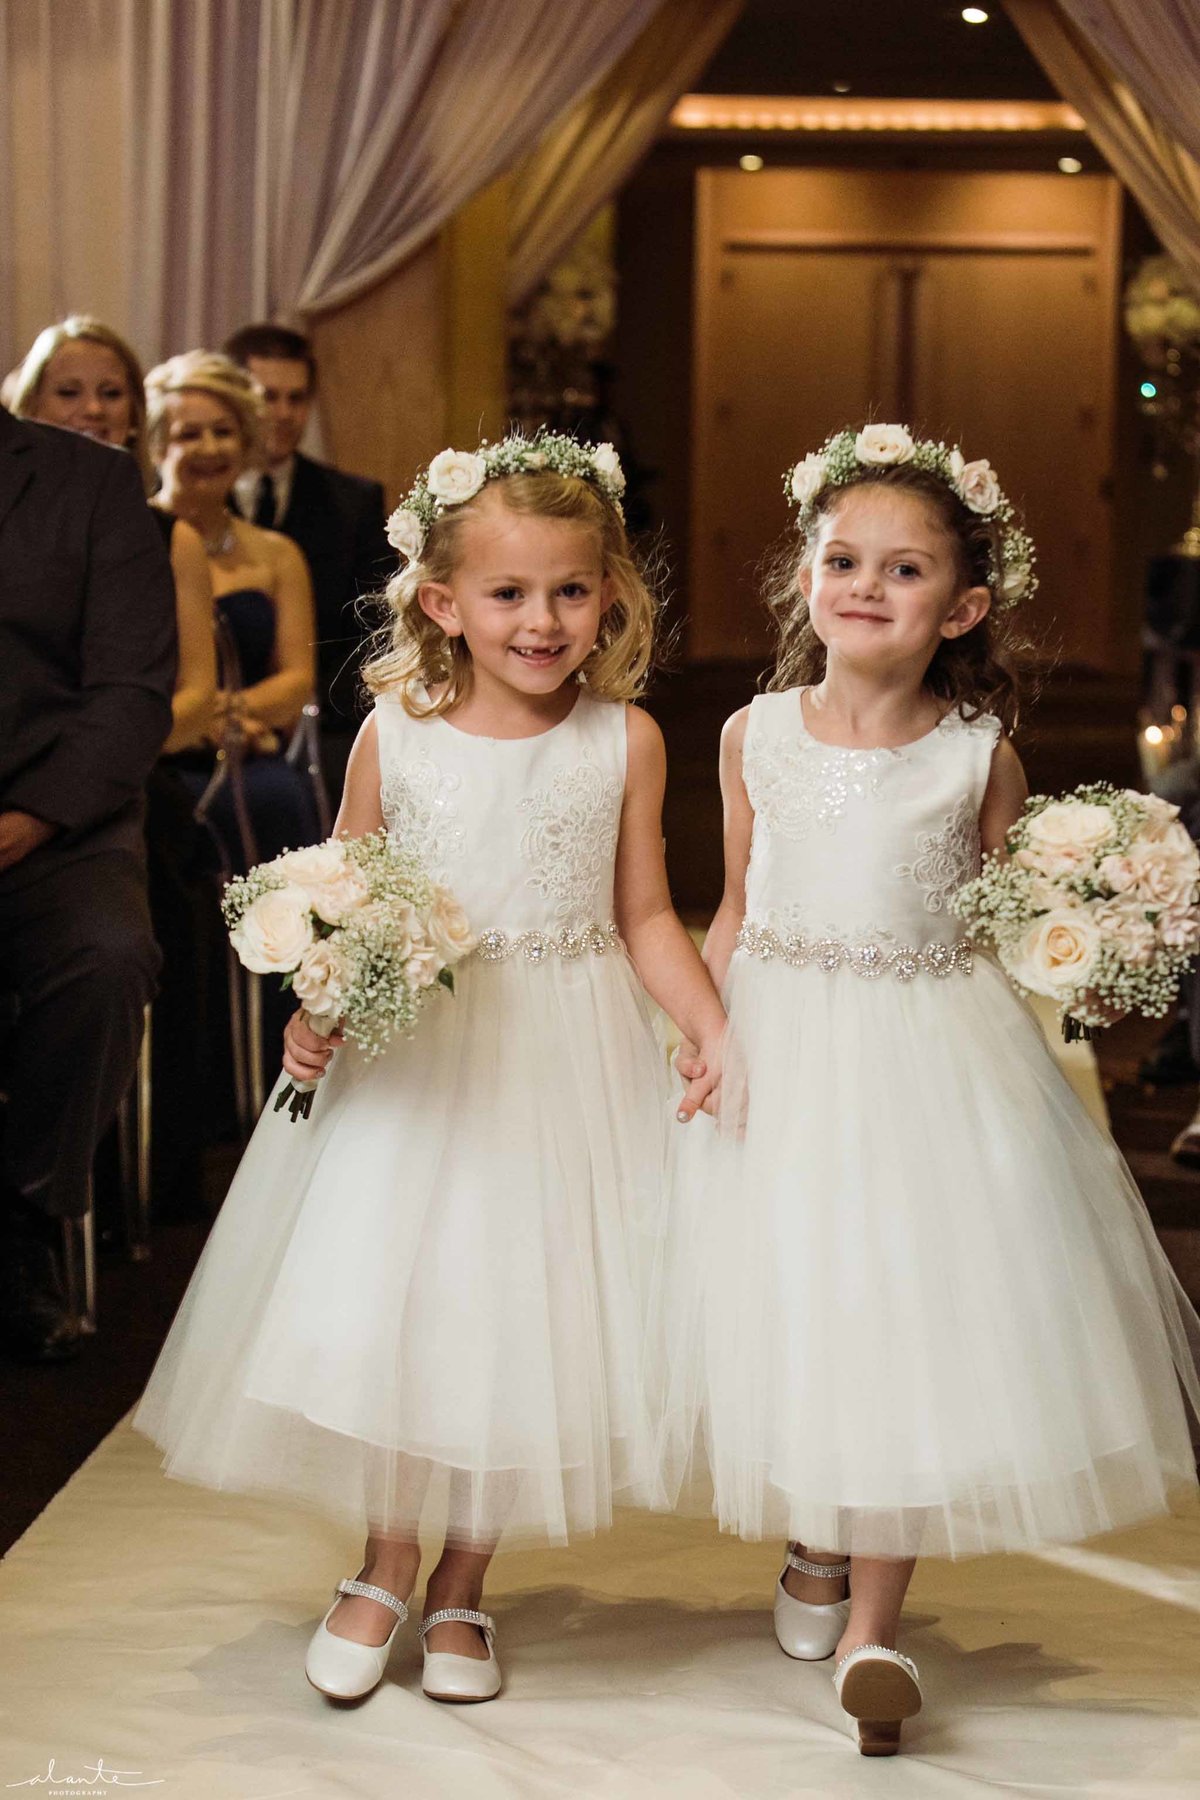 Darling flower girls with white flower crowns and small floral posies.